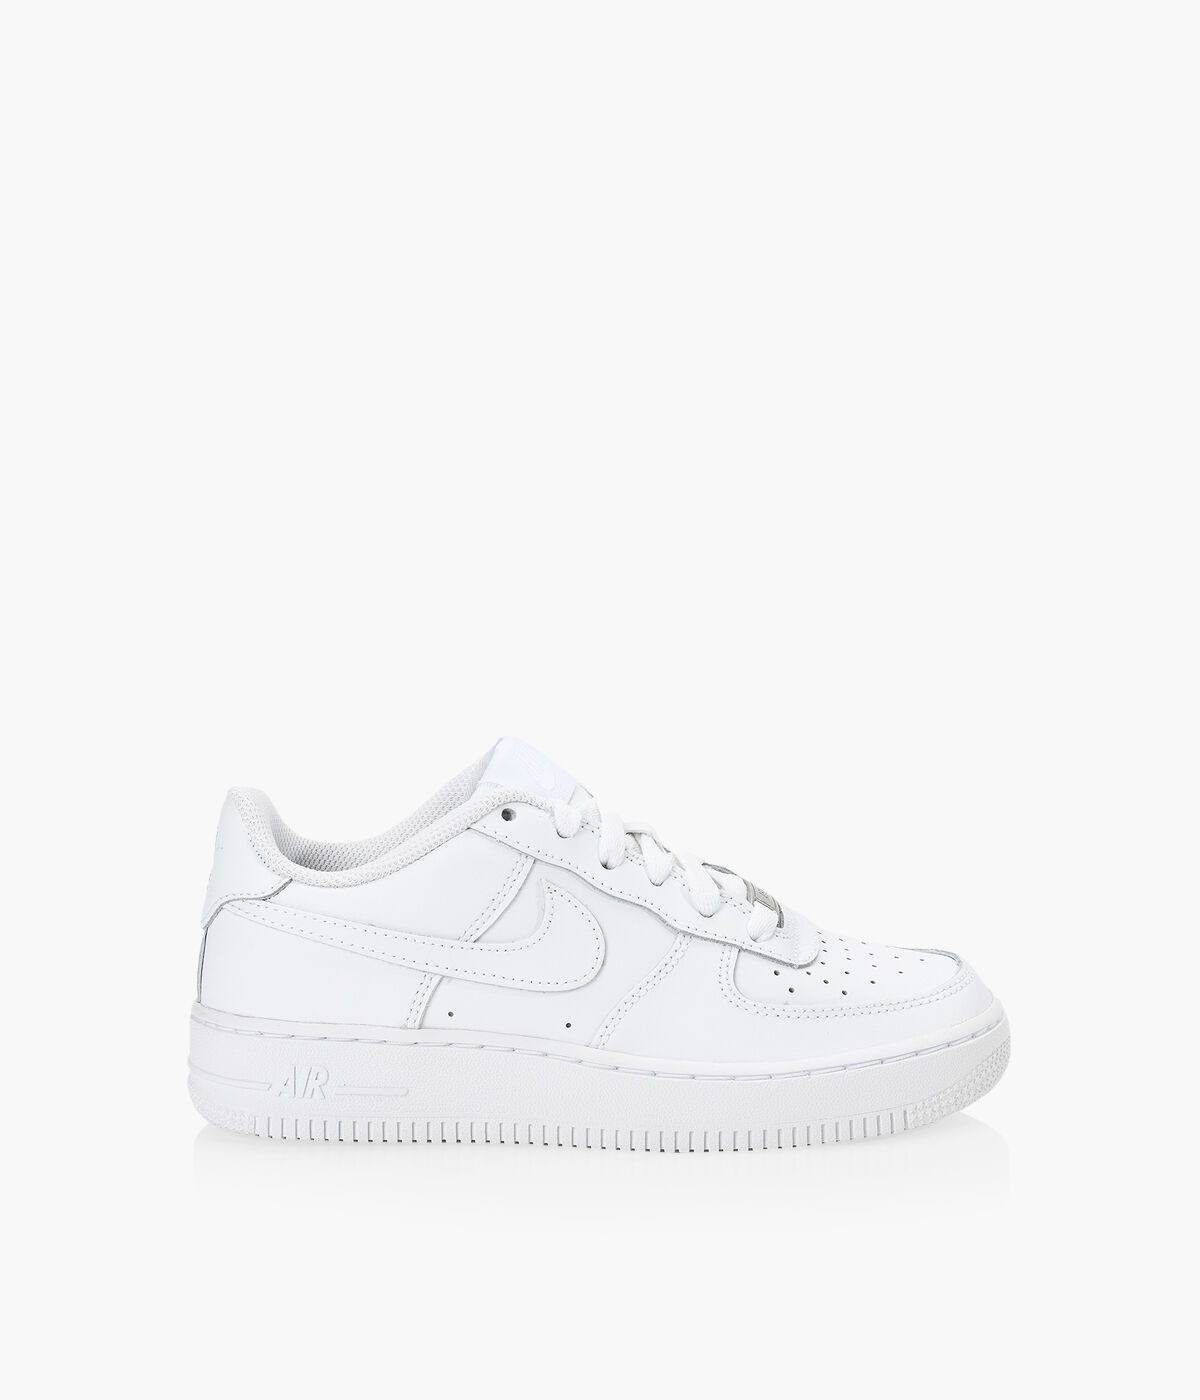 size 13.5 air force 1